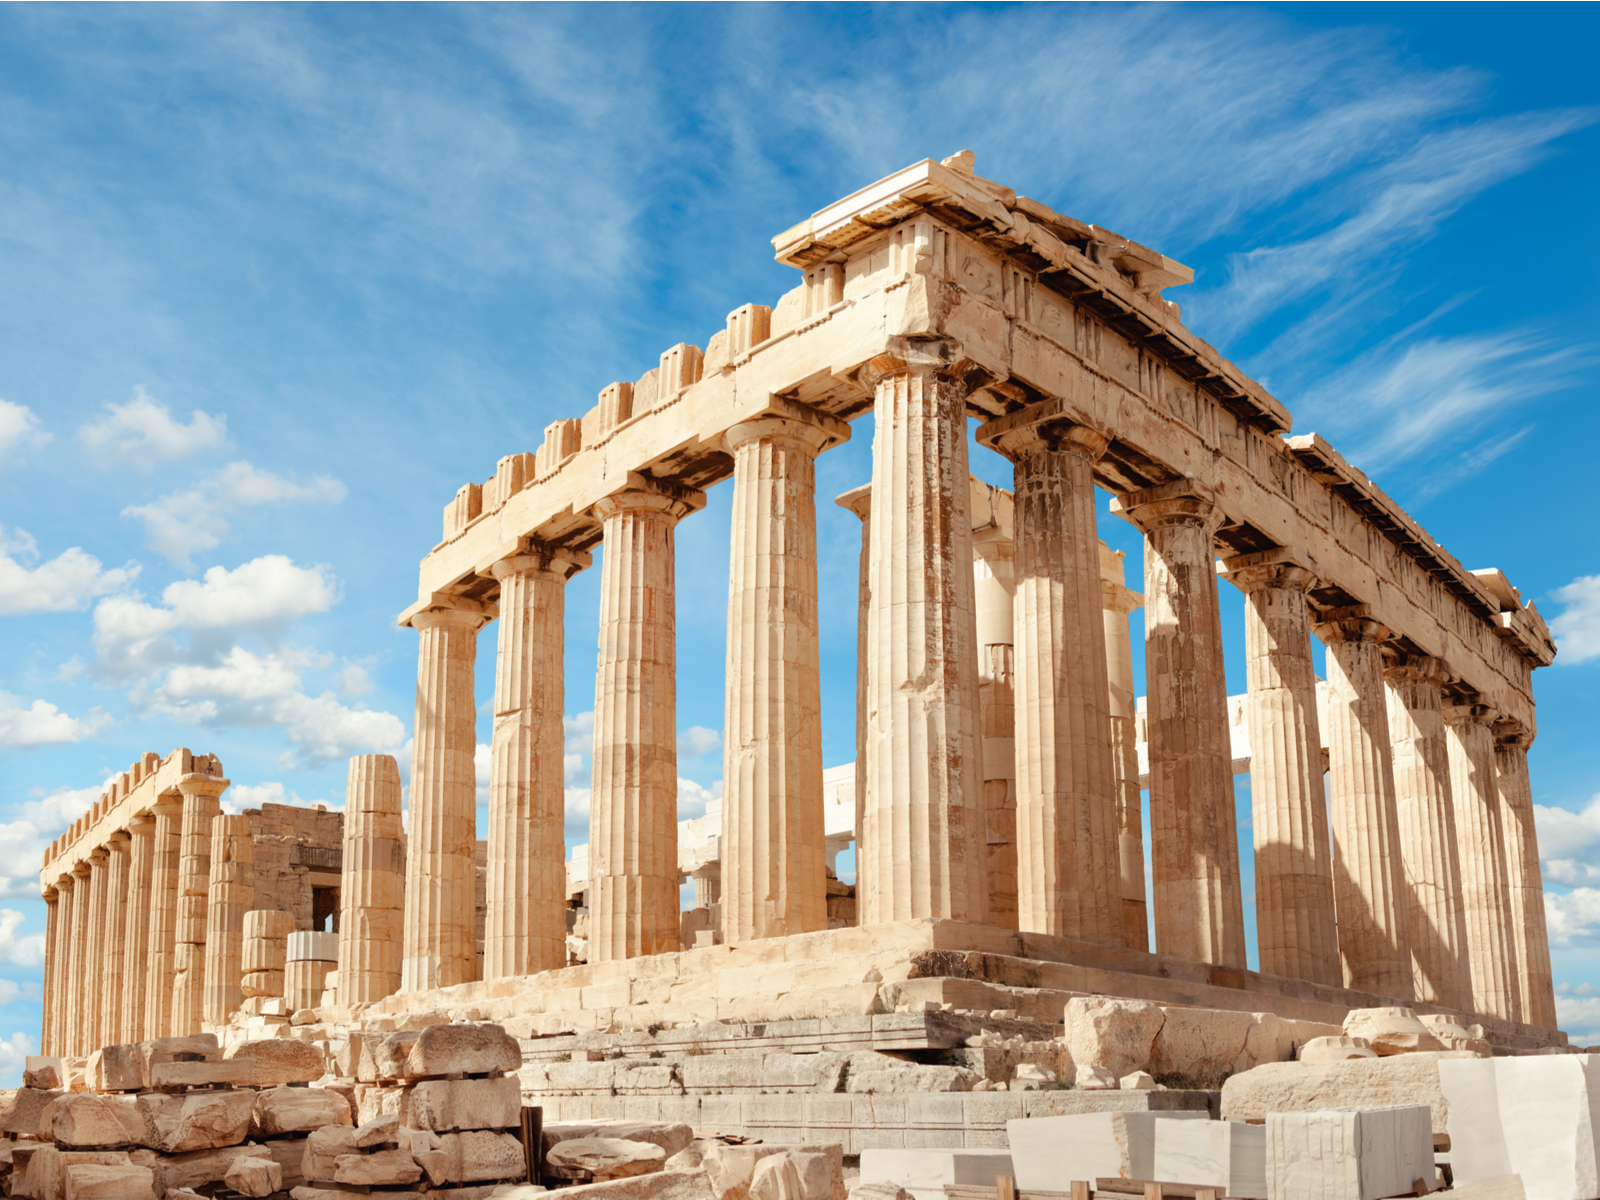 The iconic Parthenon Temple ruins at Acropolis in Athens, a piece on the best places to visit in Greece, with its columns still sturdy as of today